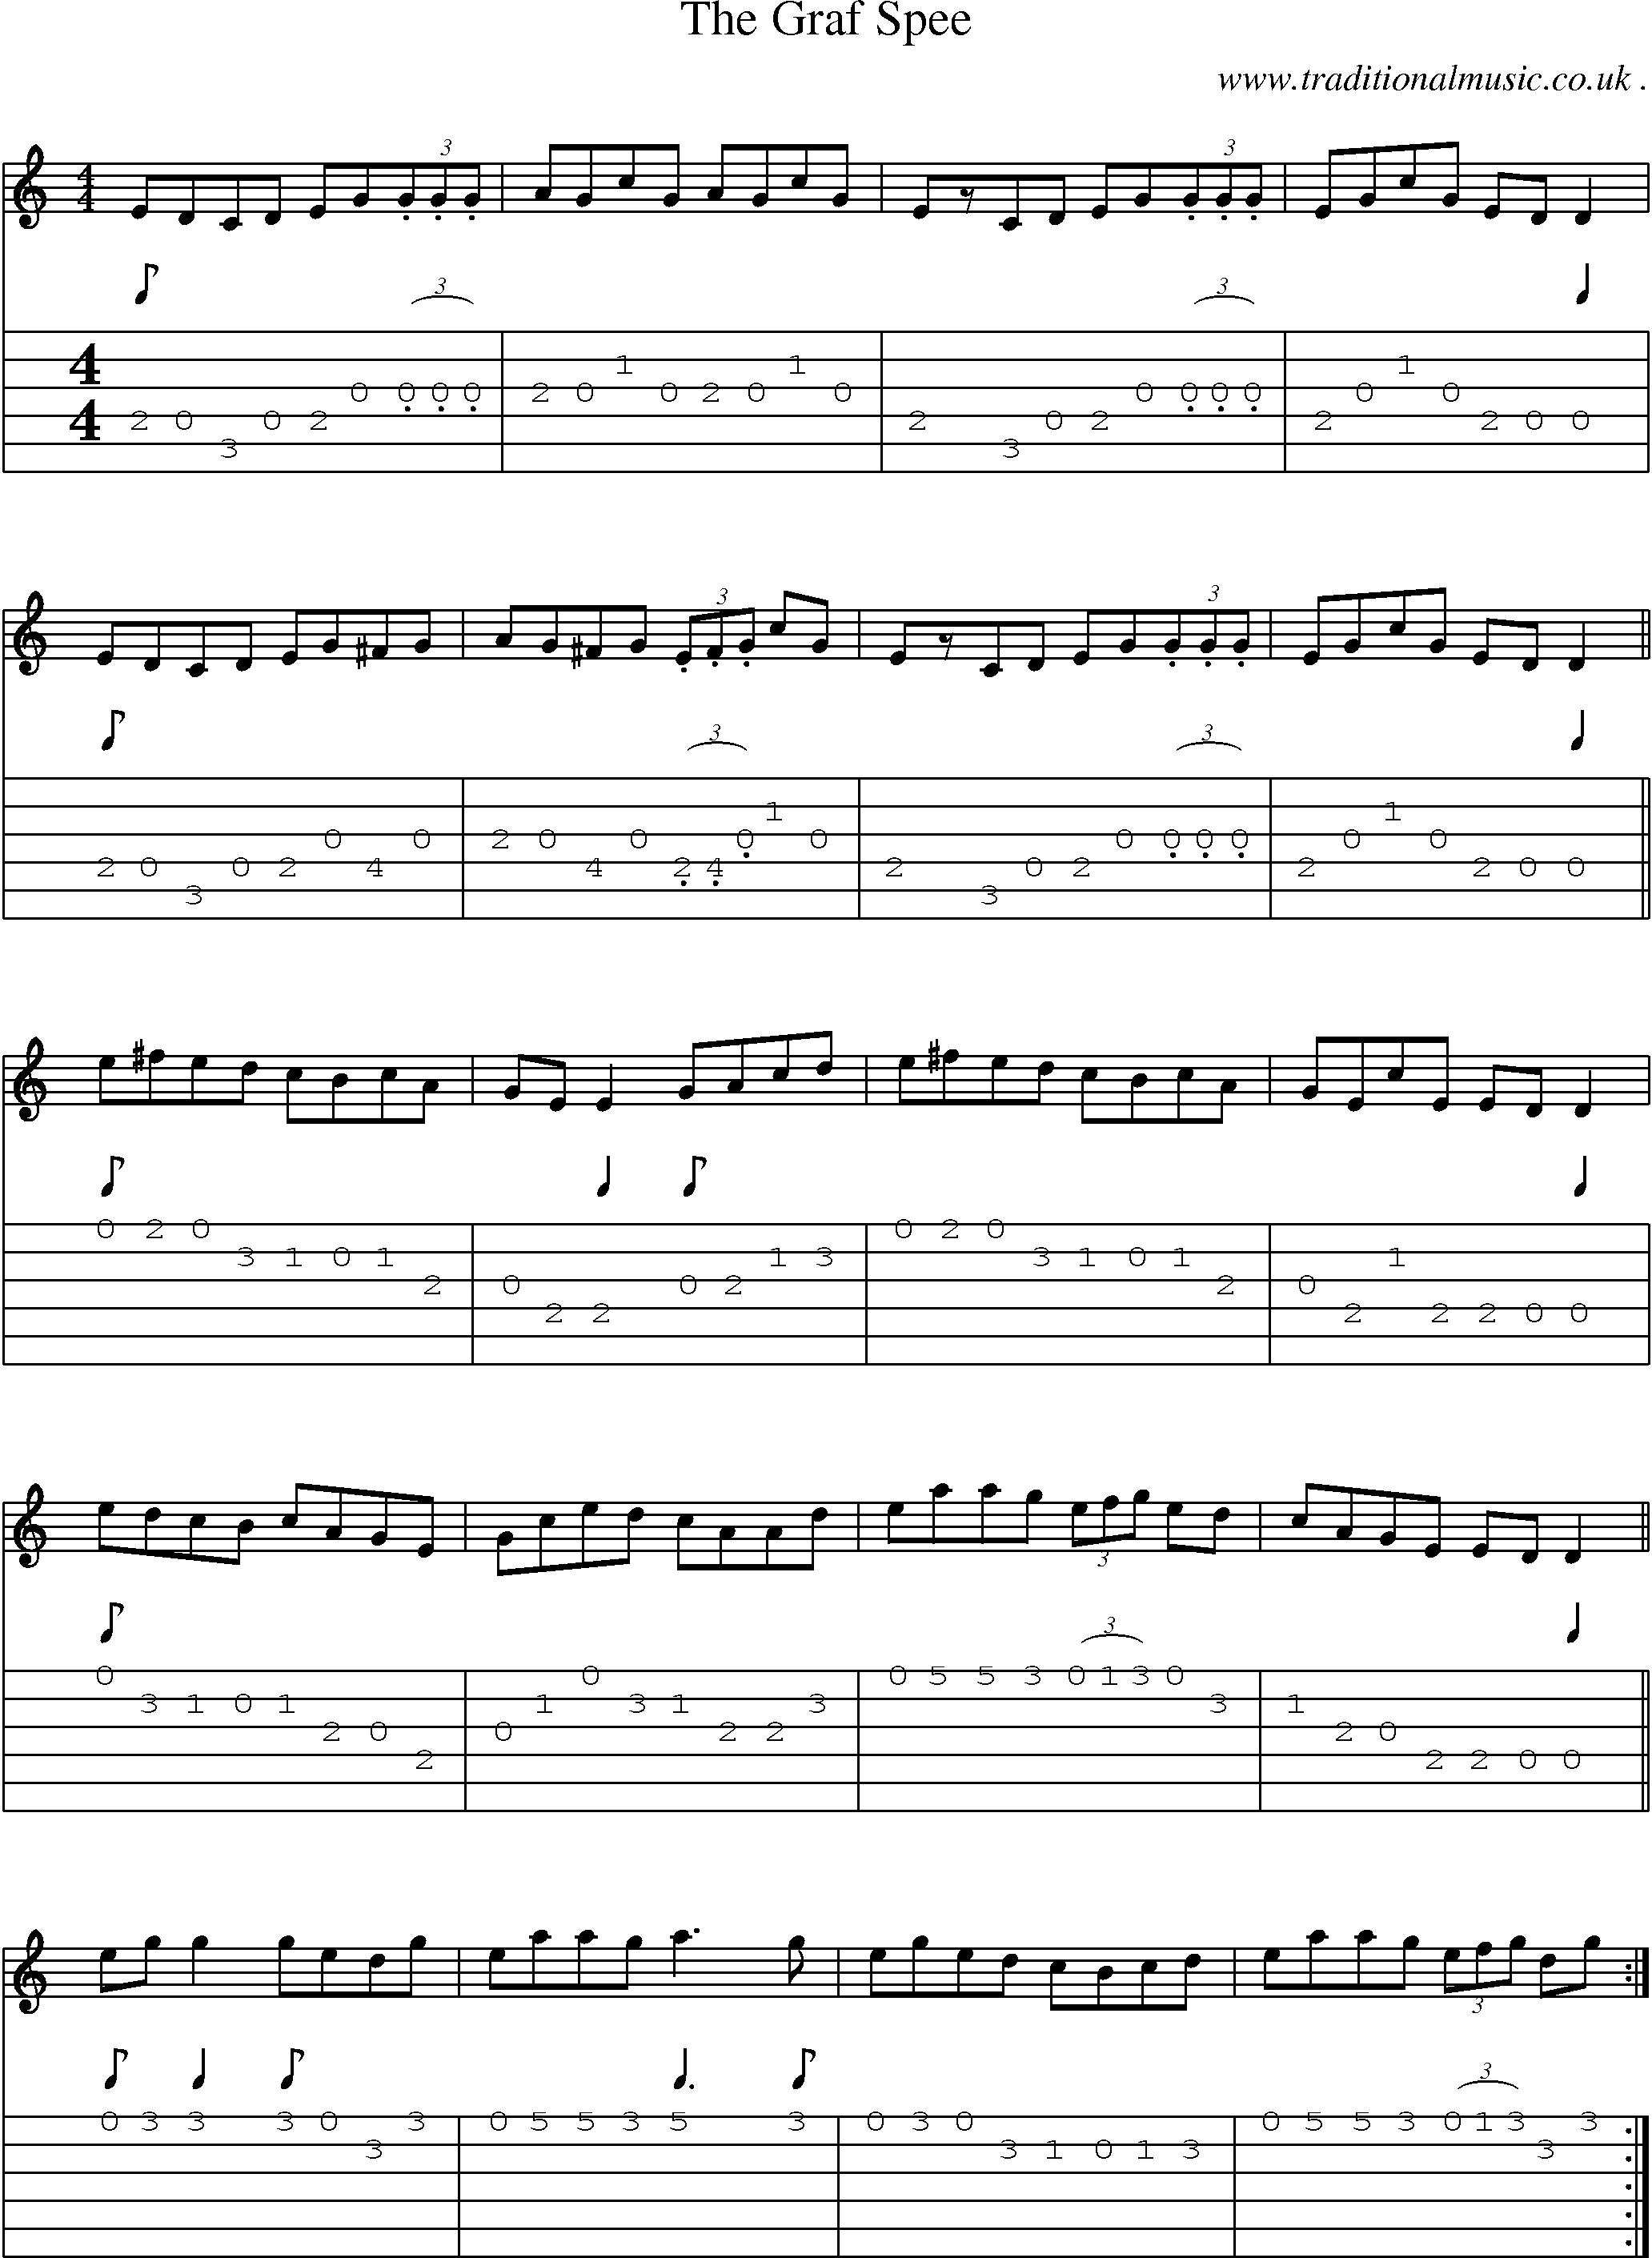 Sheet-Music and Guitar Tabs for The Graf Spee